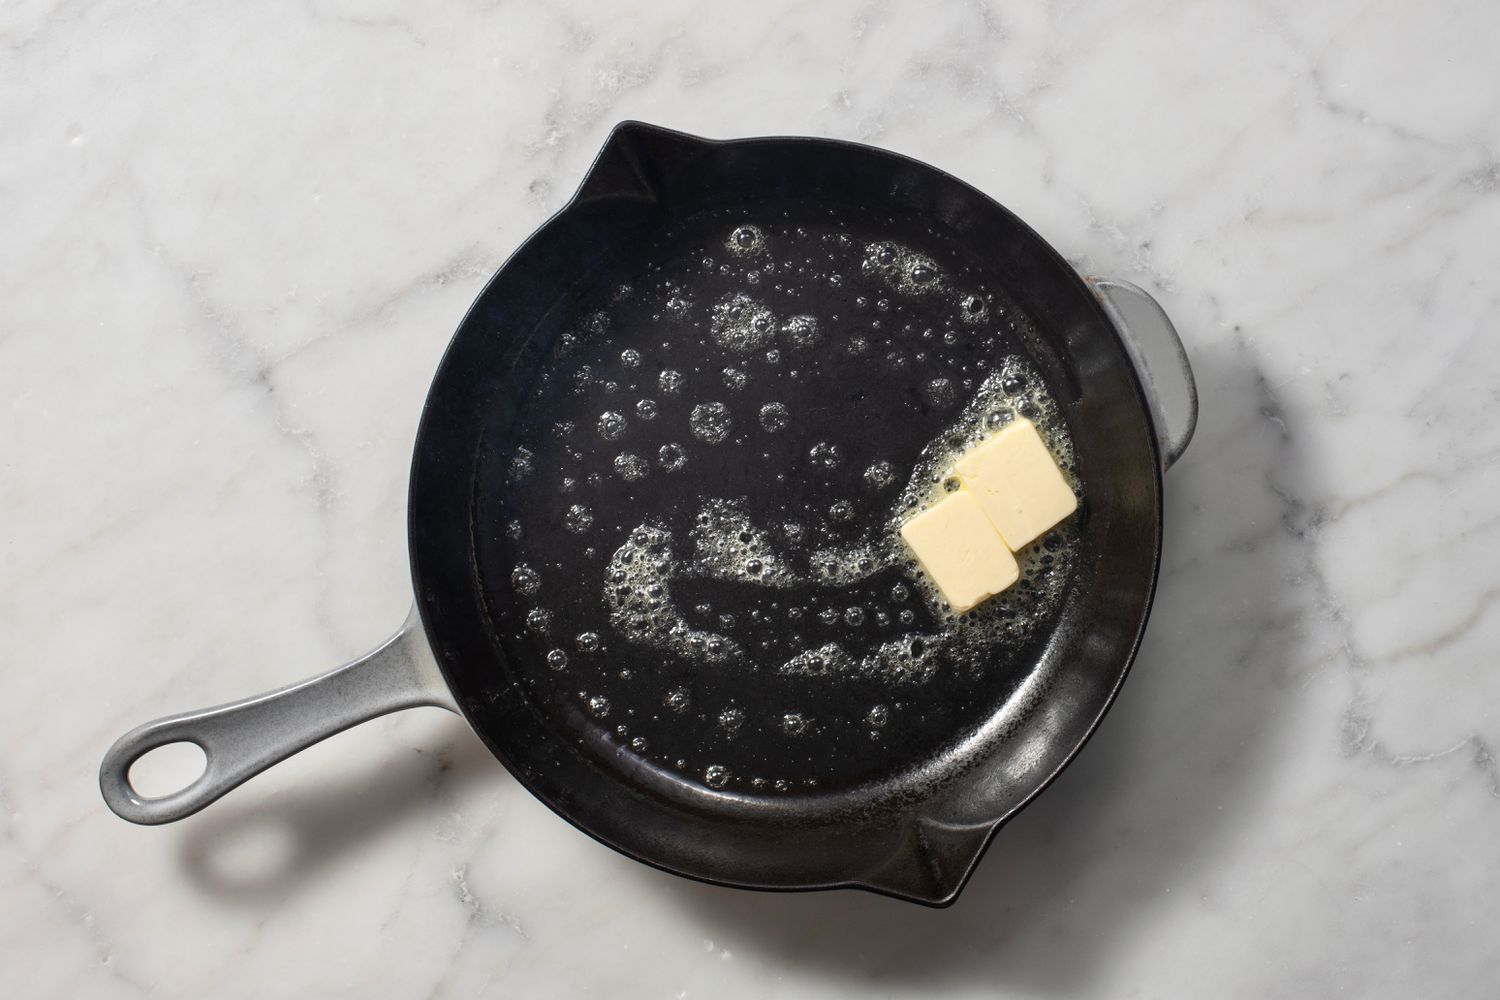 Pieces of butter melting in a hot cast iron pan